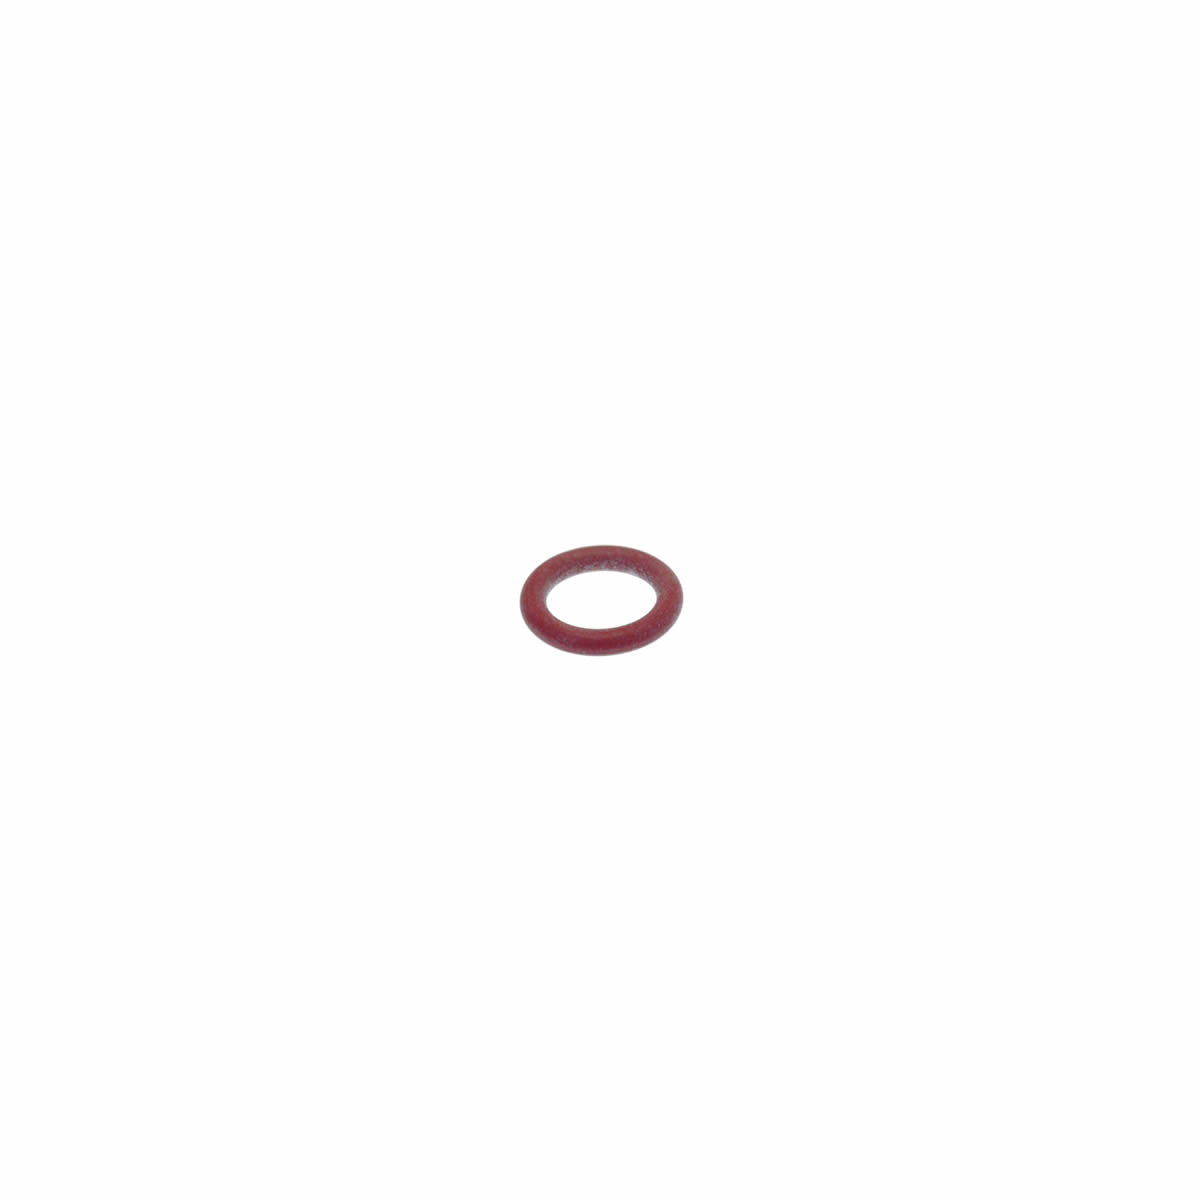 O-ring 0080-20 Red Silicone